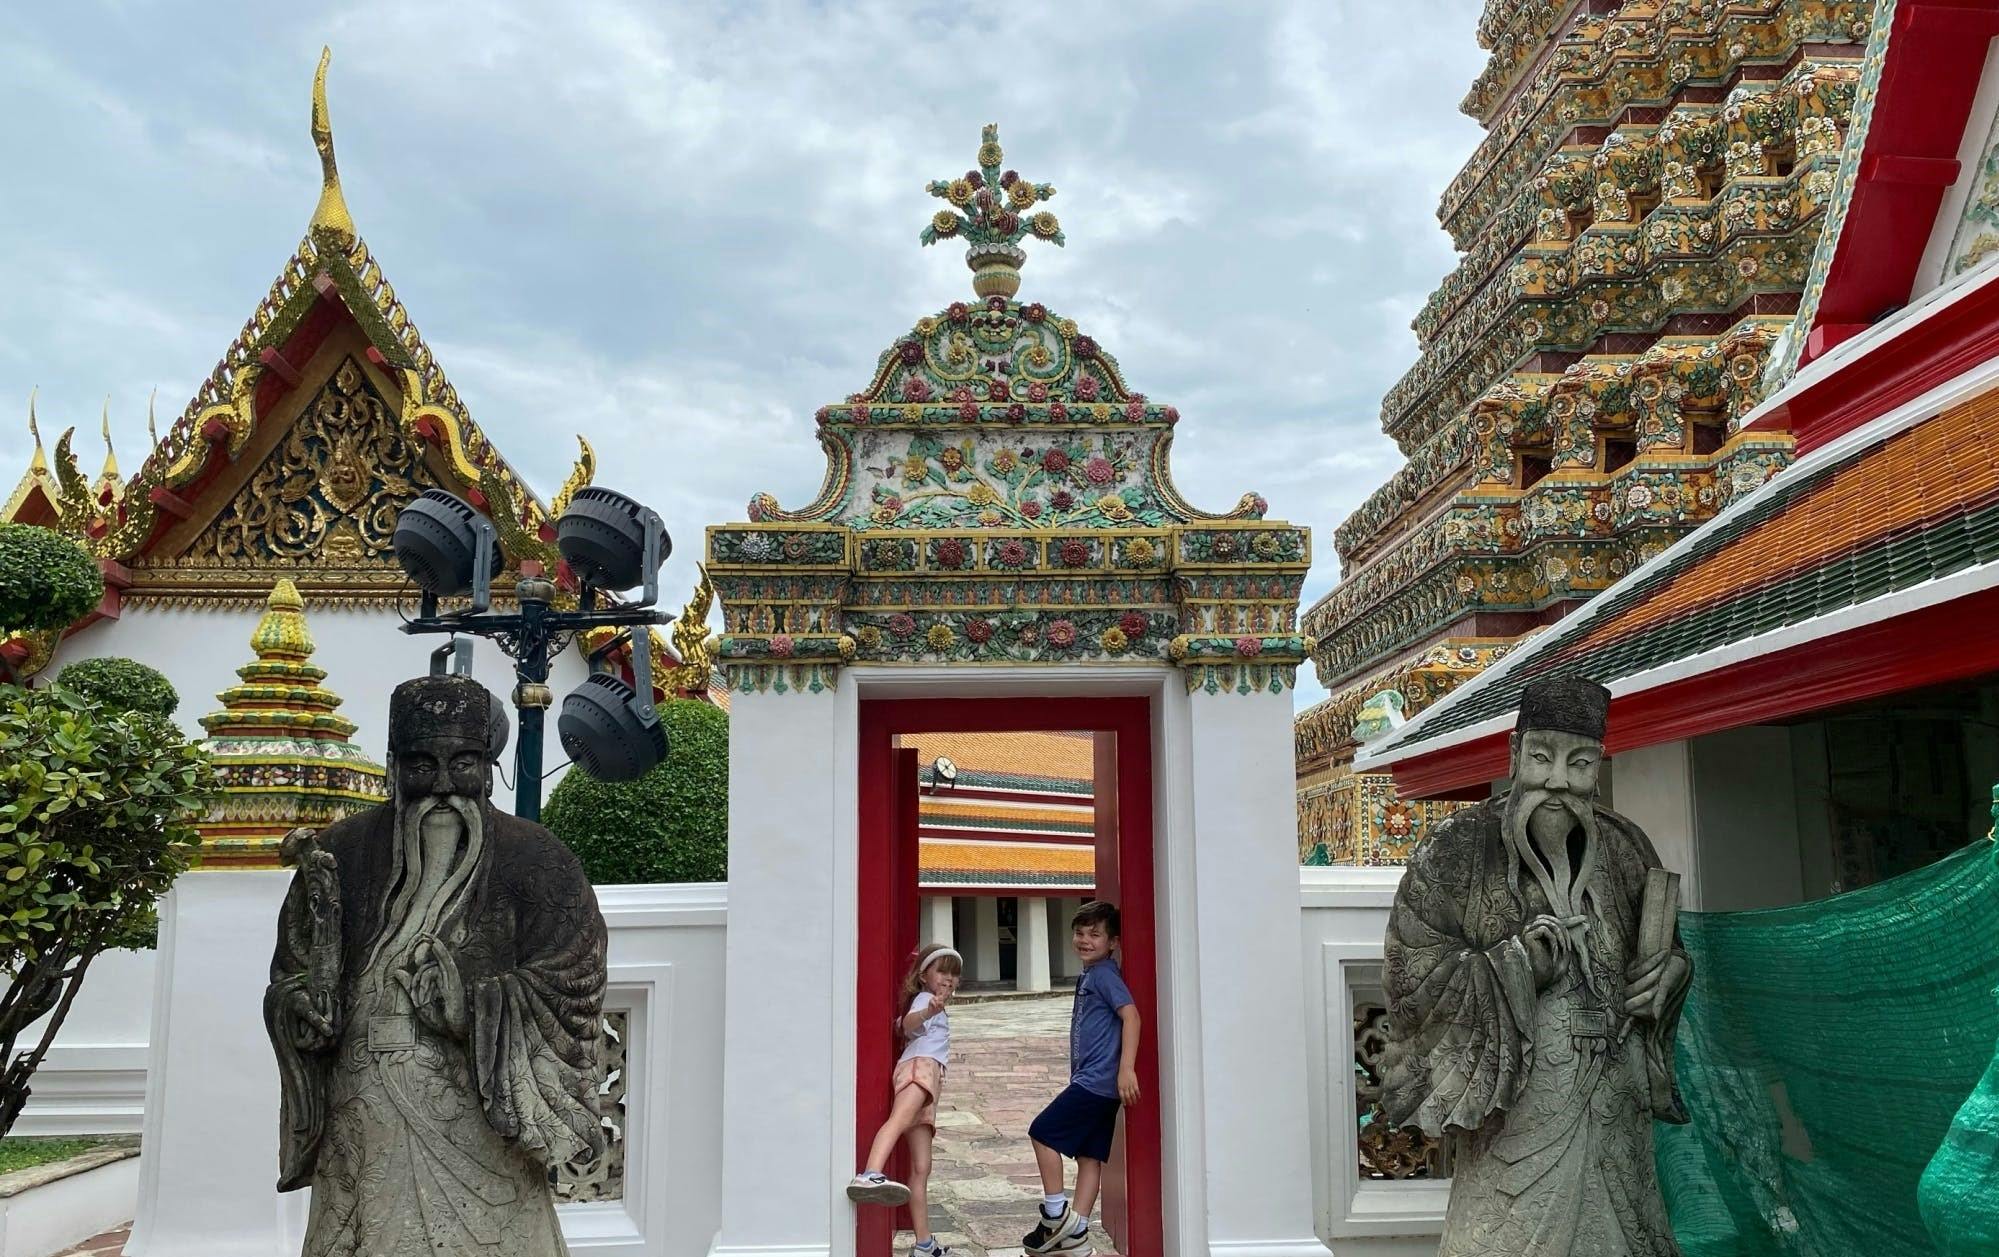 Tastes and temples along the Chao Phraya private tour